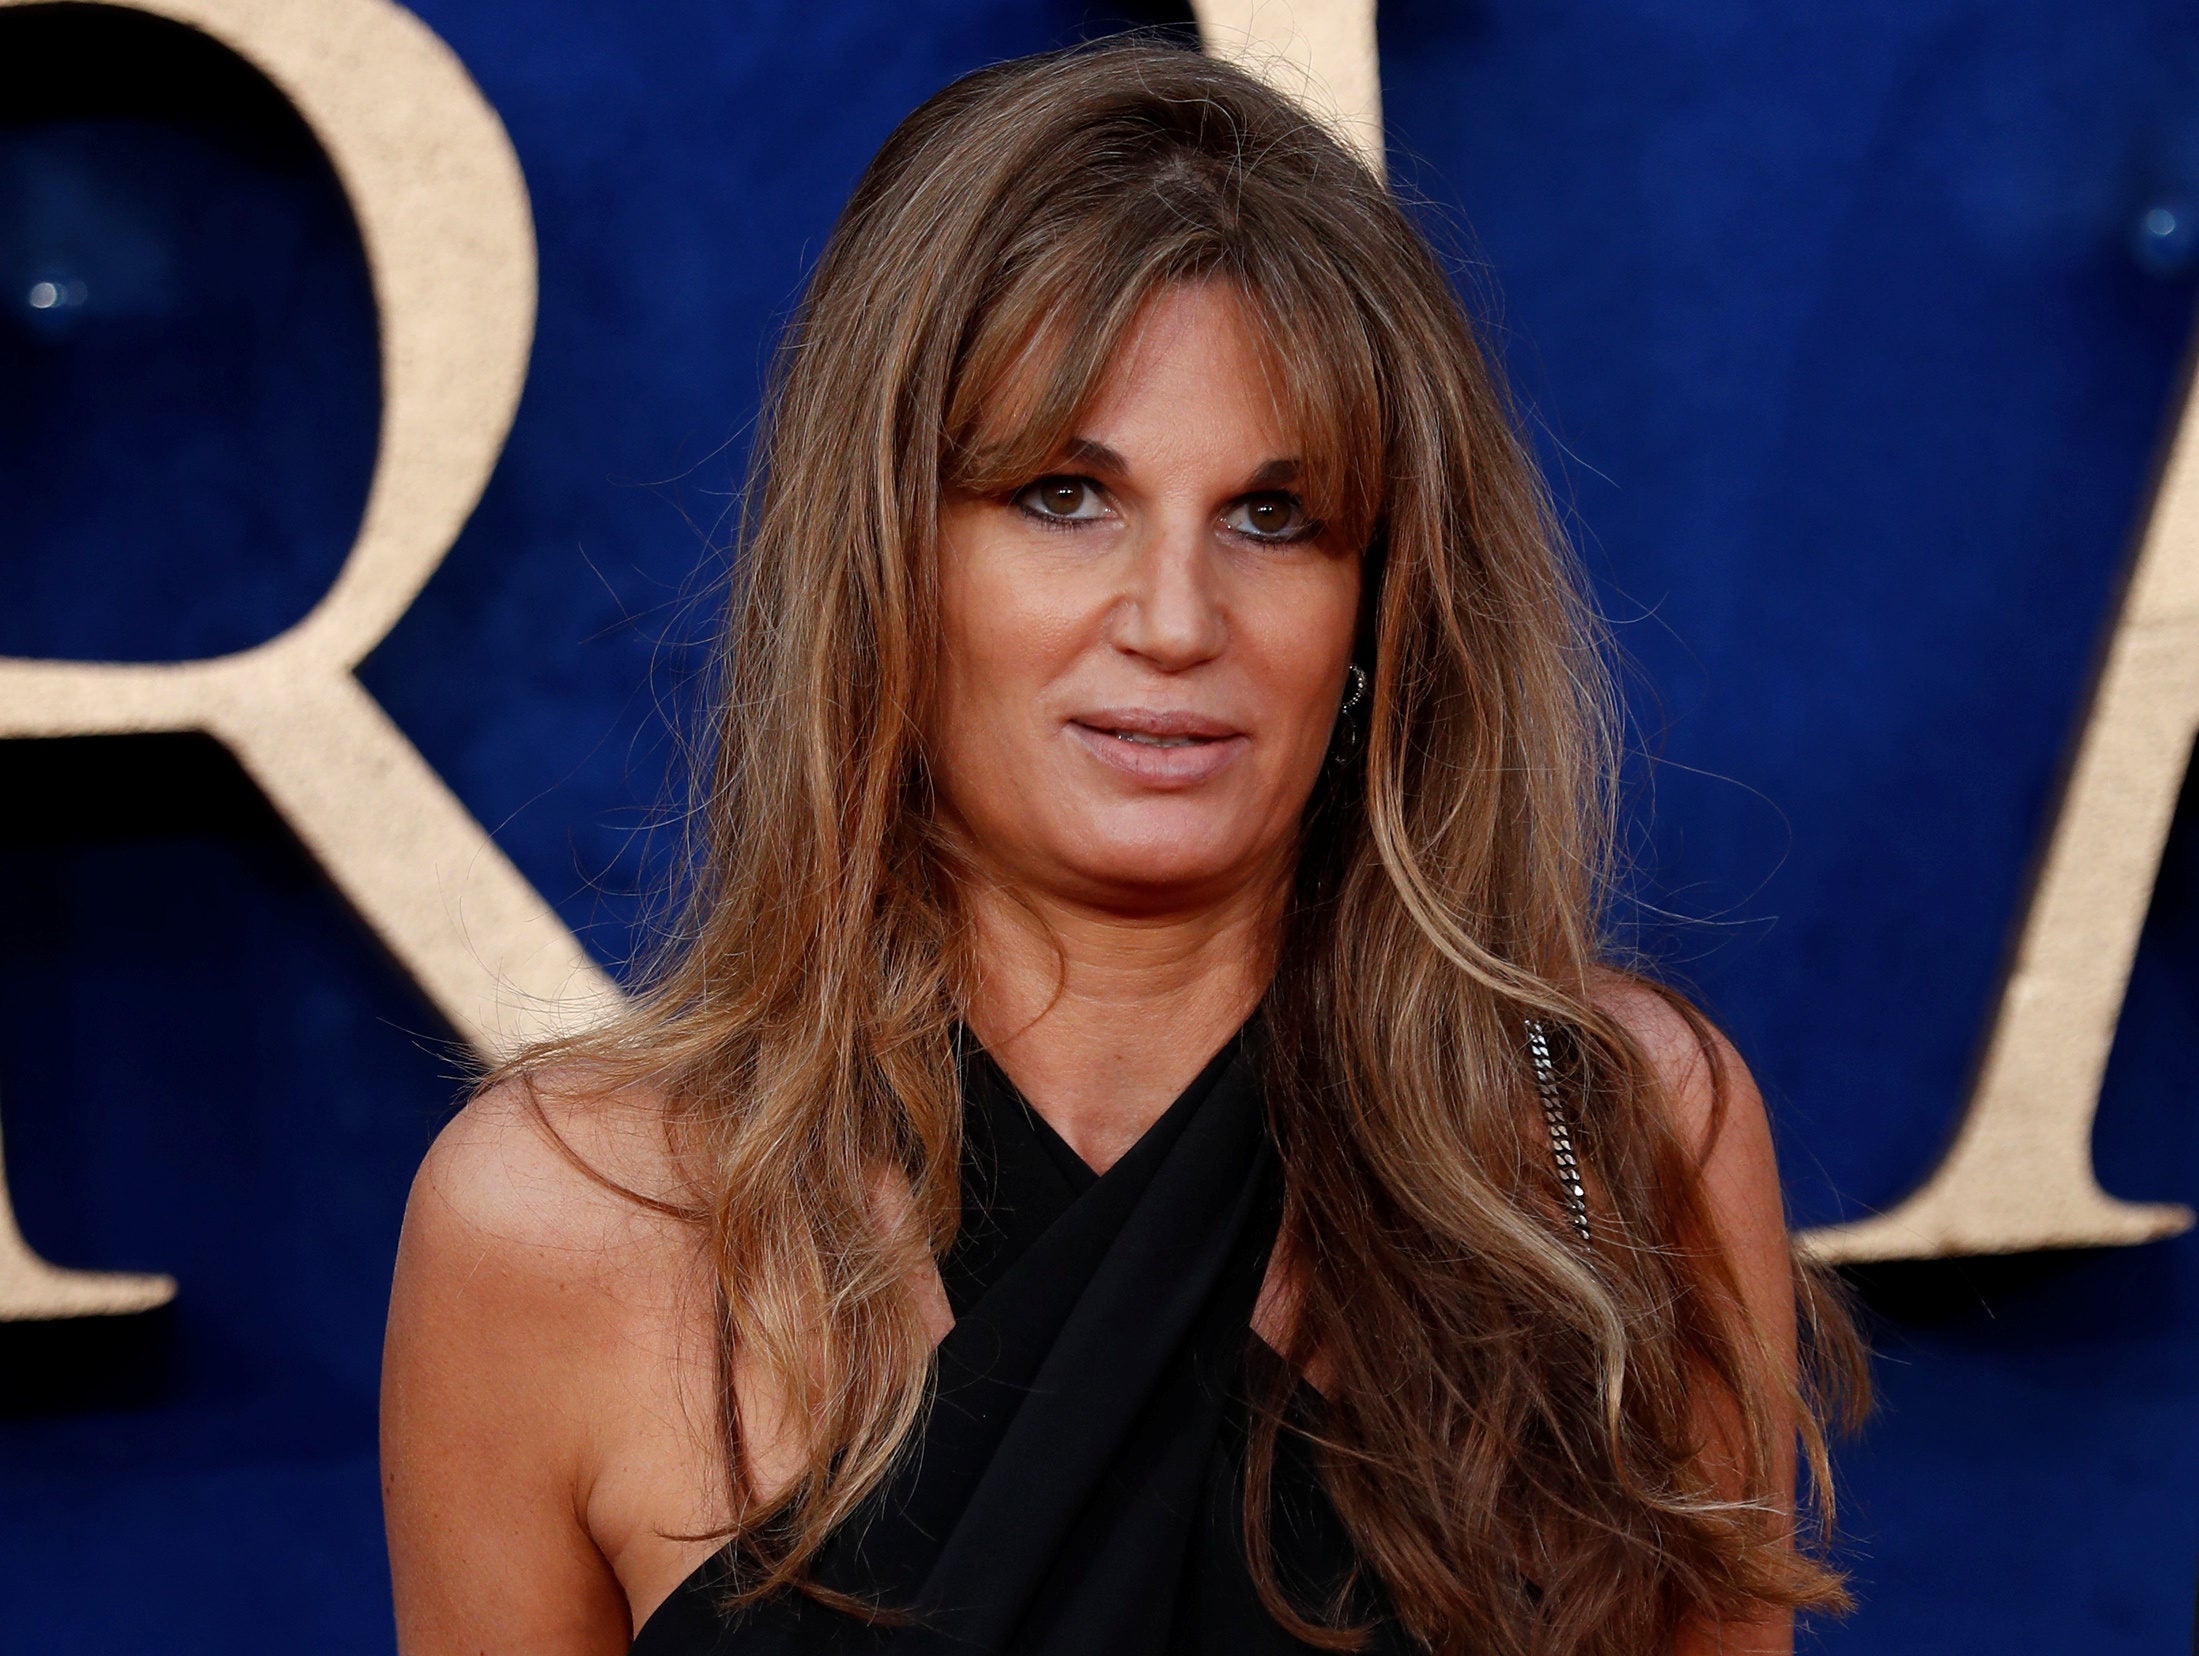 Daily Telegraph left red-faced after mixing up own radio critic with 'millionaire celebrity' Jemima Goldsmith